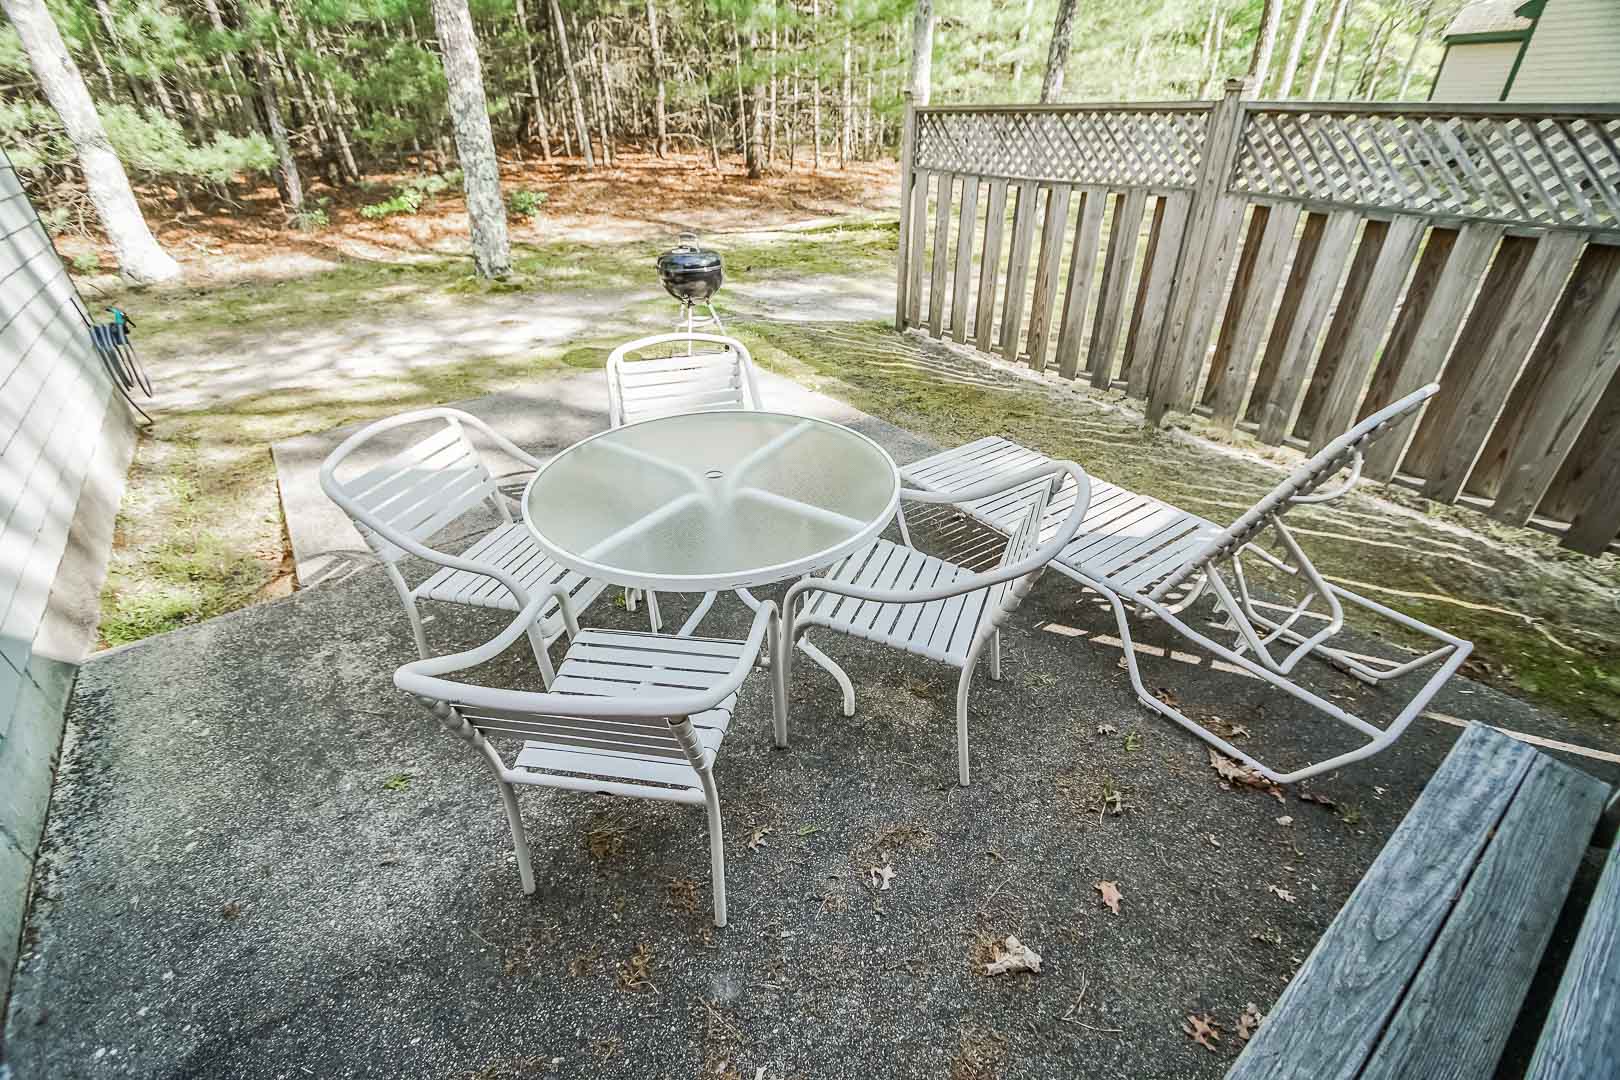 A tranquil patio area at VRI's Cape Cod Holiday Estates in Massachusetts.